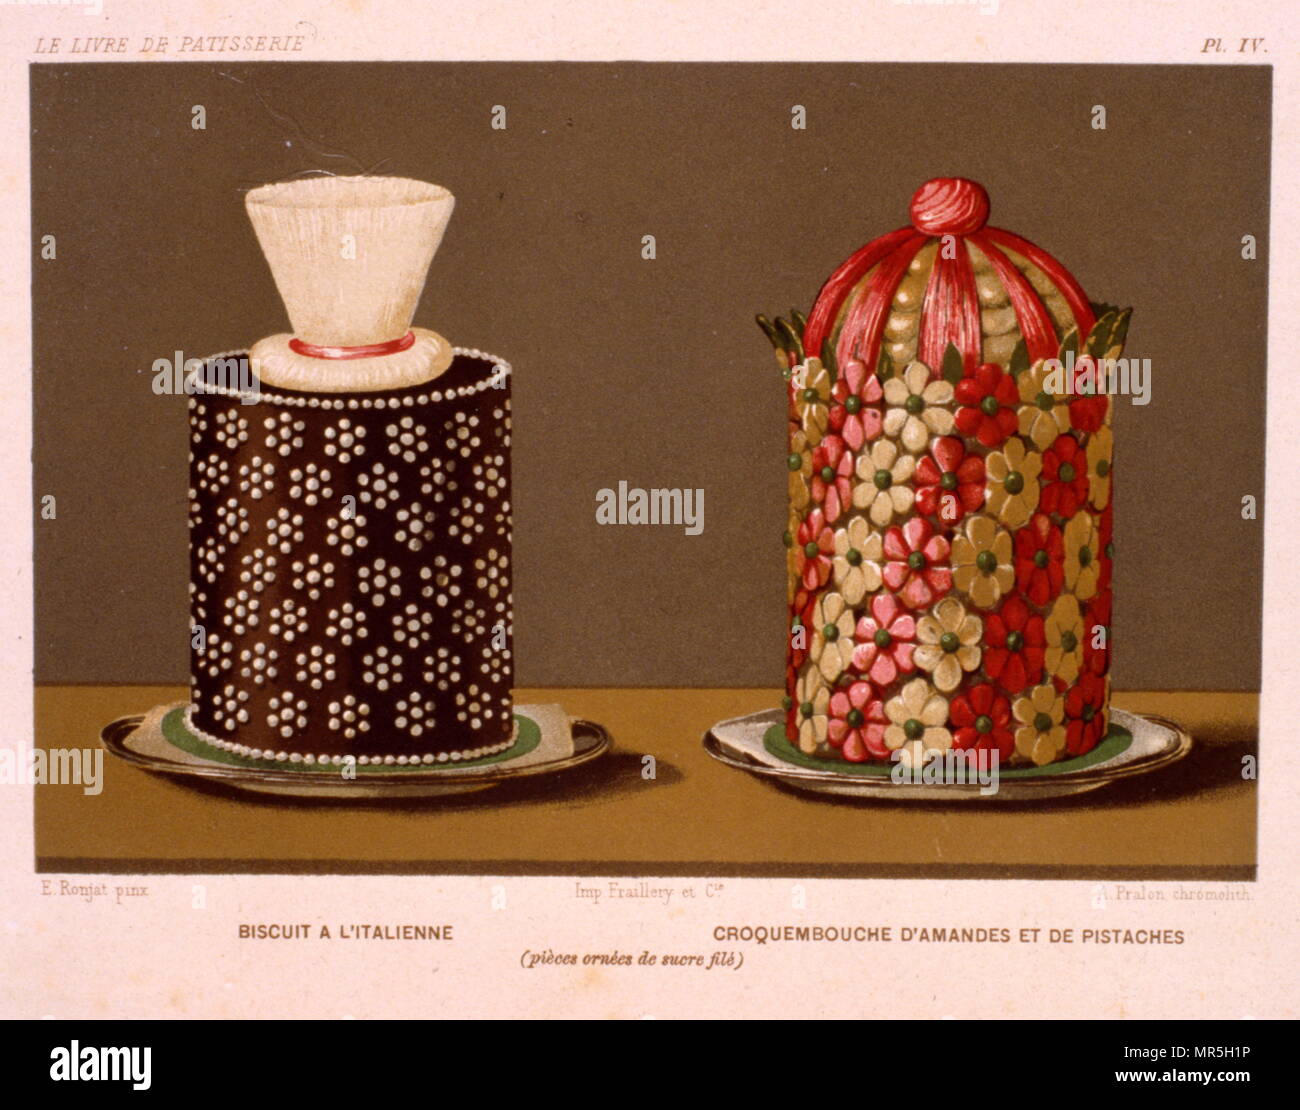 selection of attractive desserts, from 'Le Livre De Cuisine' 1867 by Jules Gouffe. chromolithograph Stock Photo